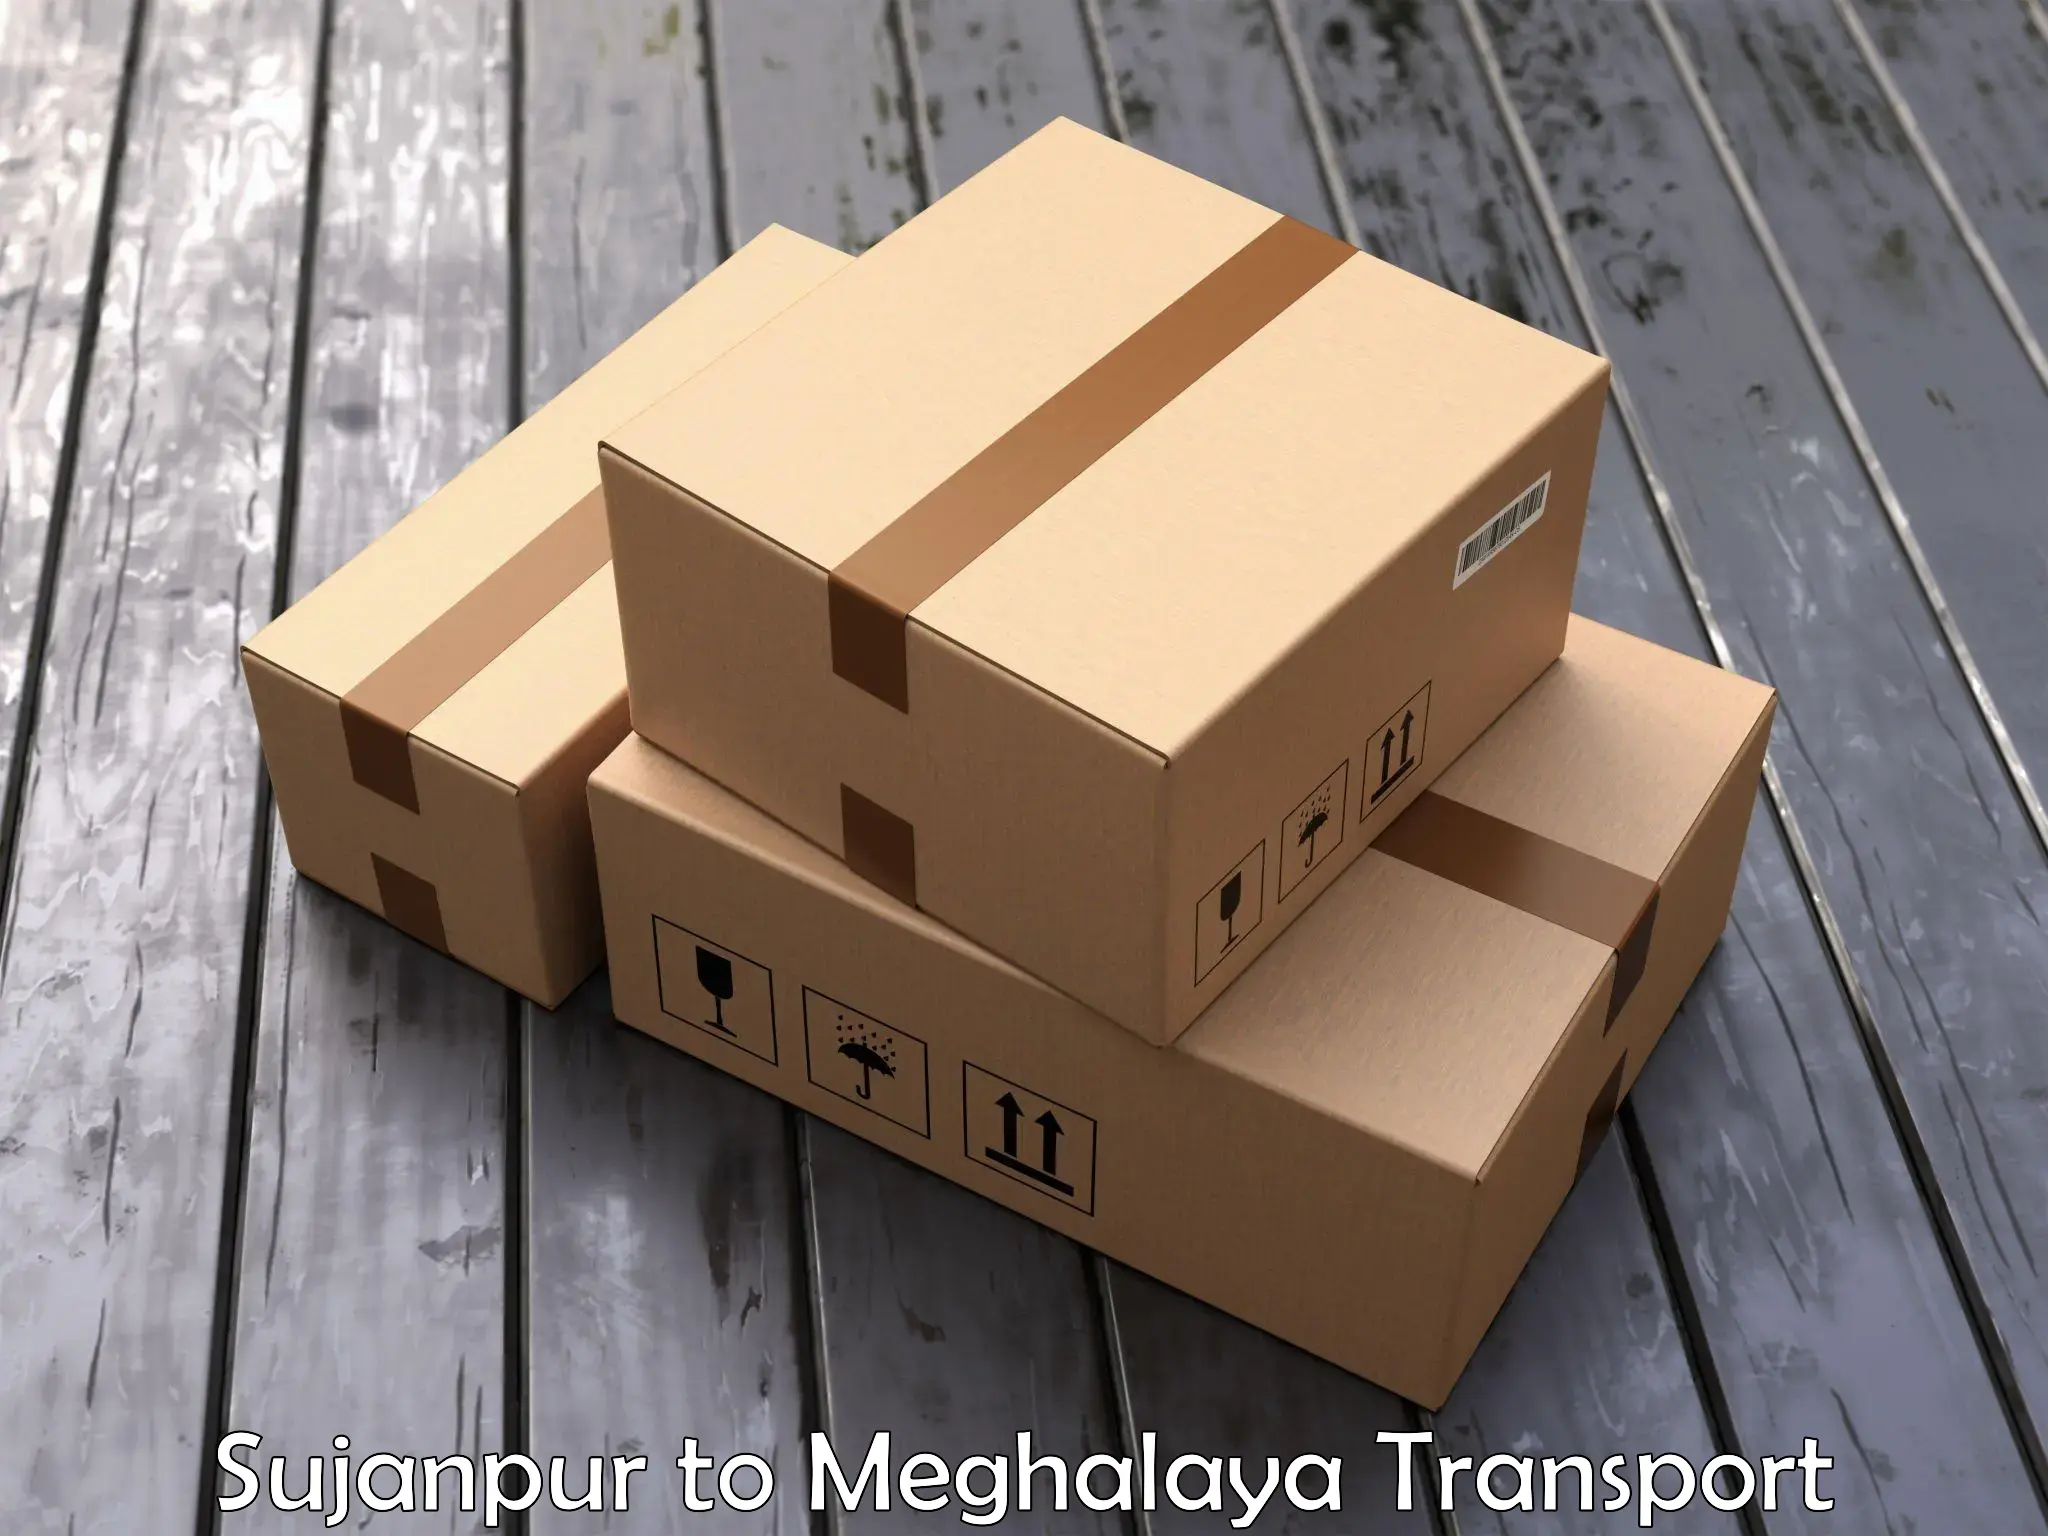 Truck transport companies in India Sujanpur to Umsaw